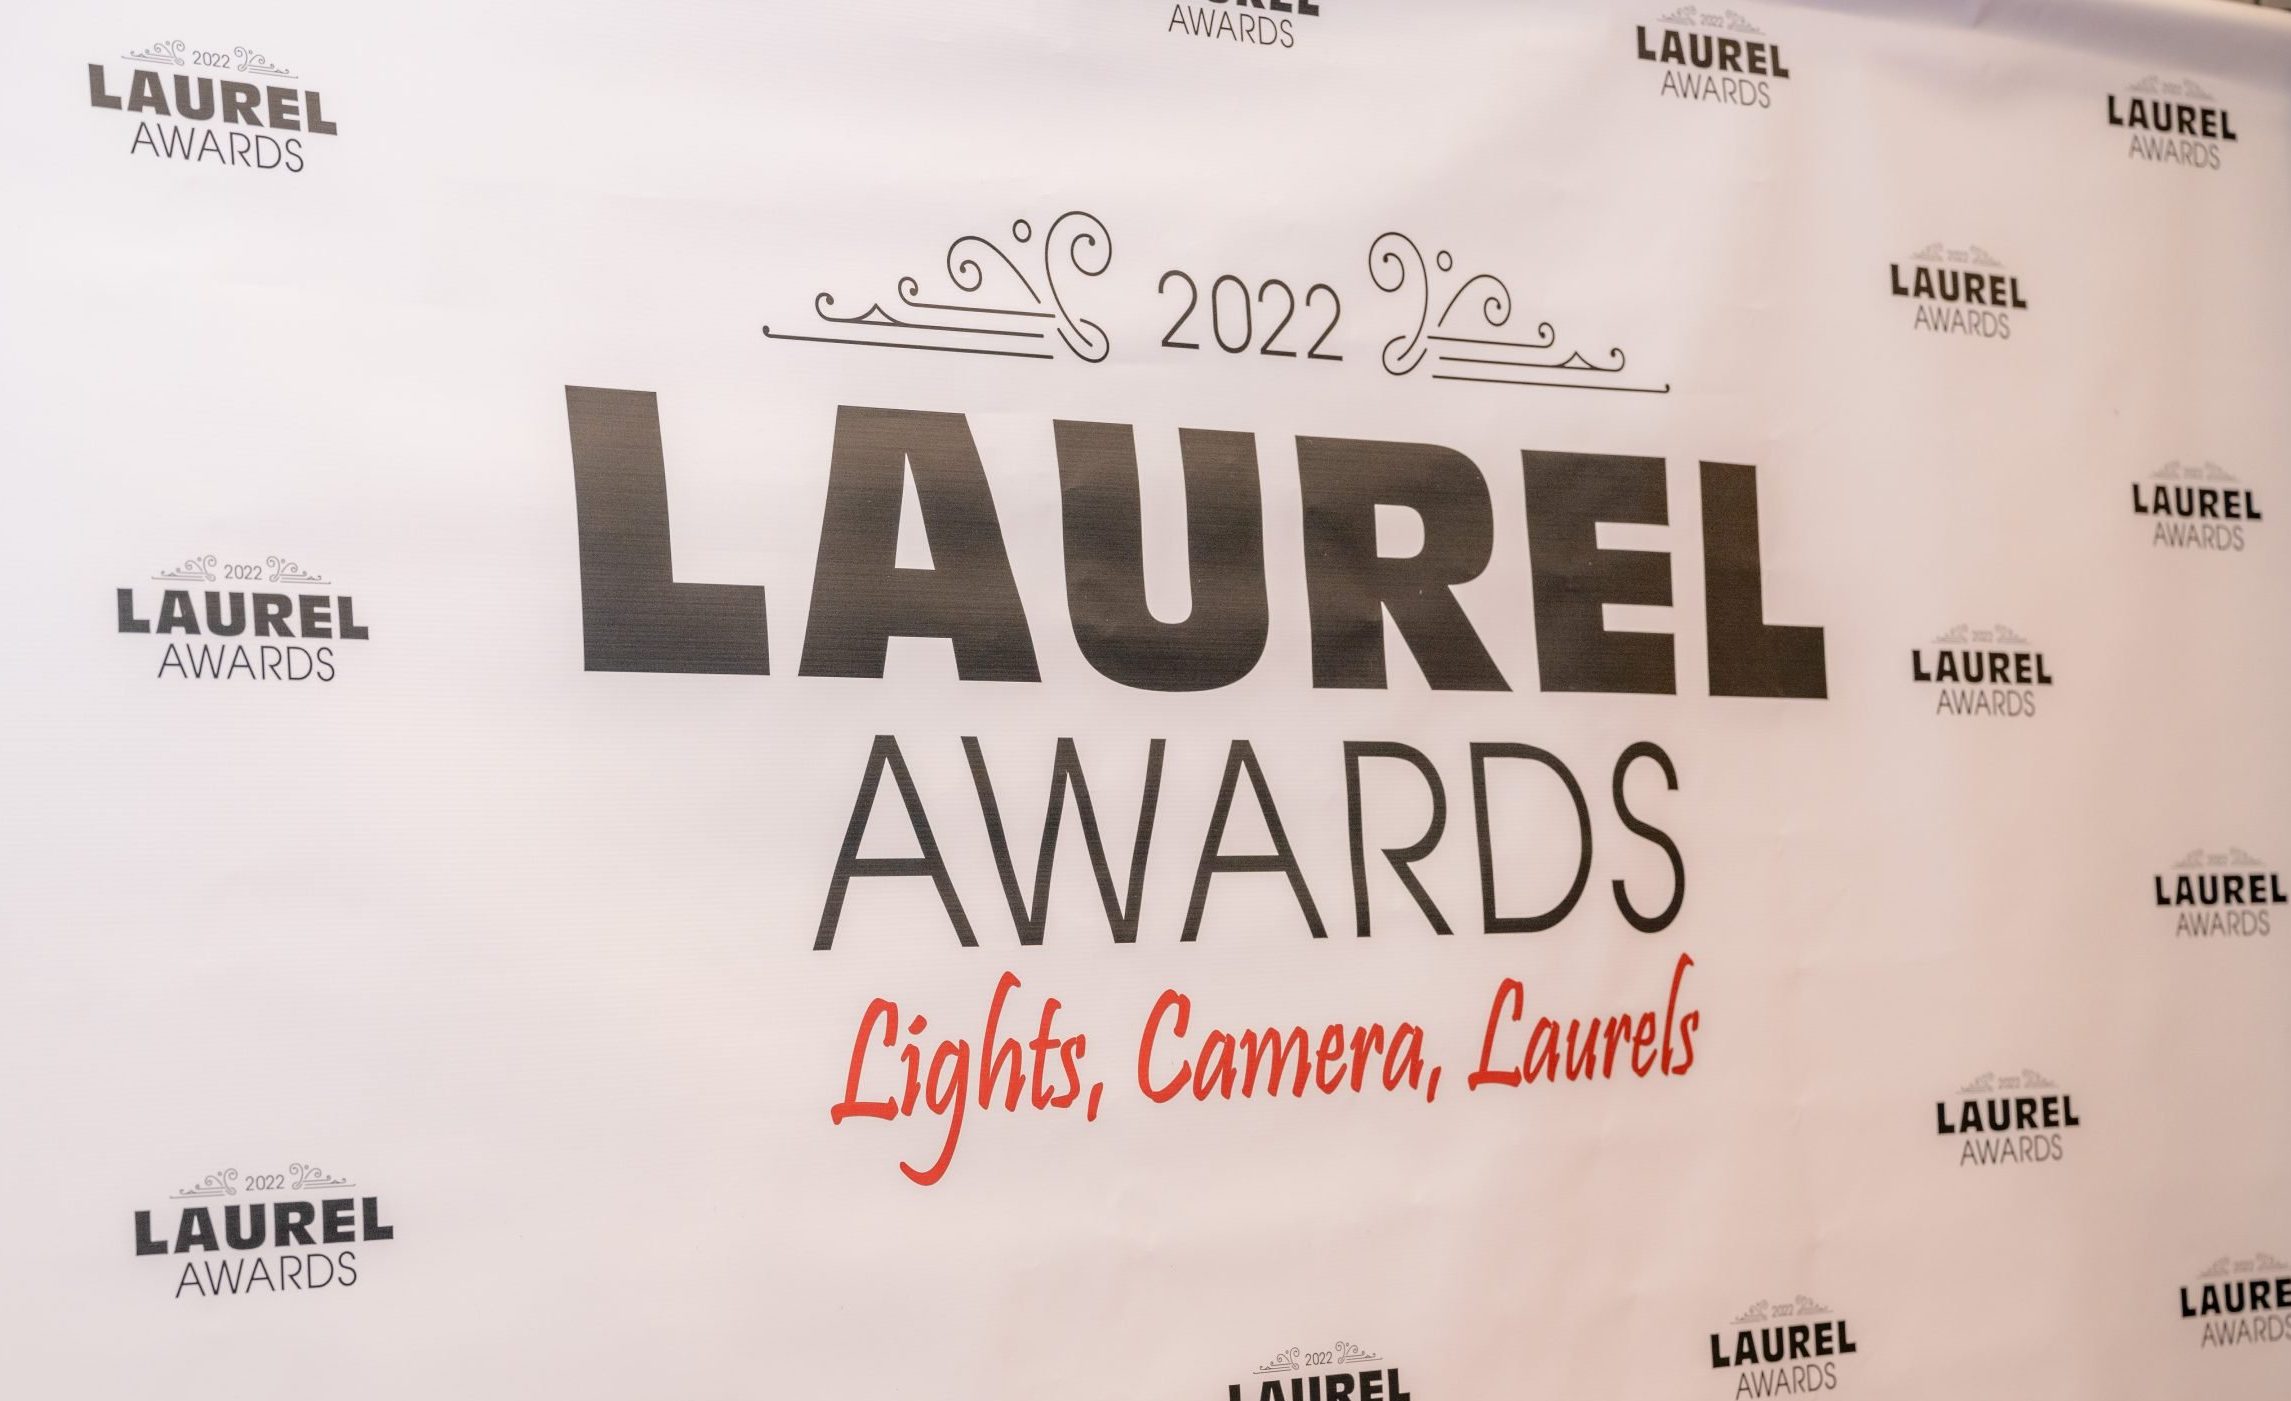 Seven Pines honored with six Laurel Awards - NEFBA Laurel Awards 2 24 2023 2531 1 scaled e1678808974859